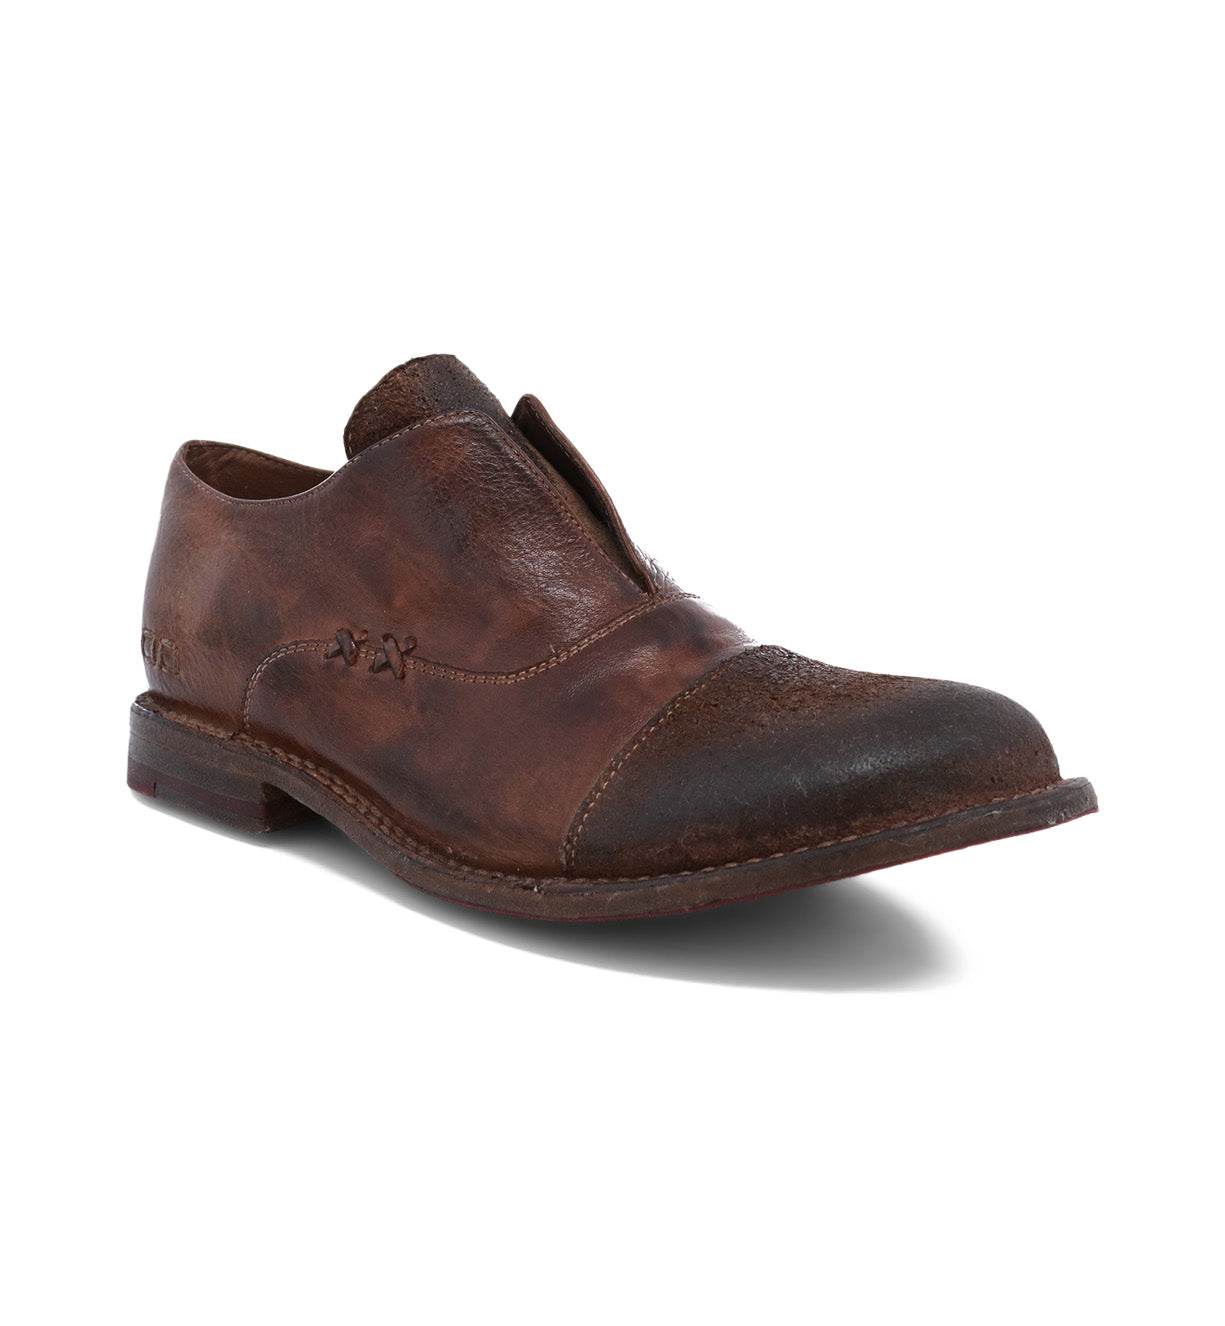 The Garden M by Bed Stu, men's brown leather slip on shoe.